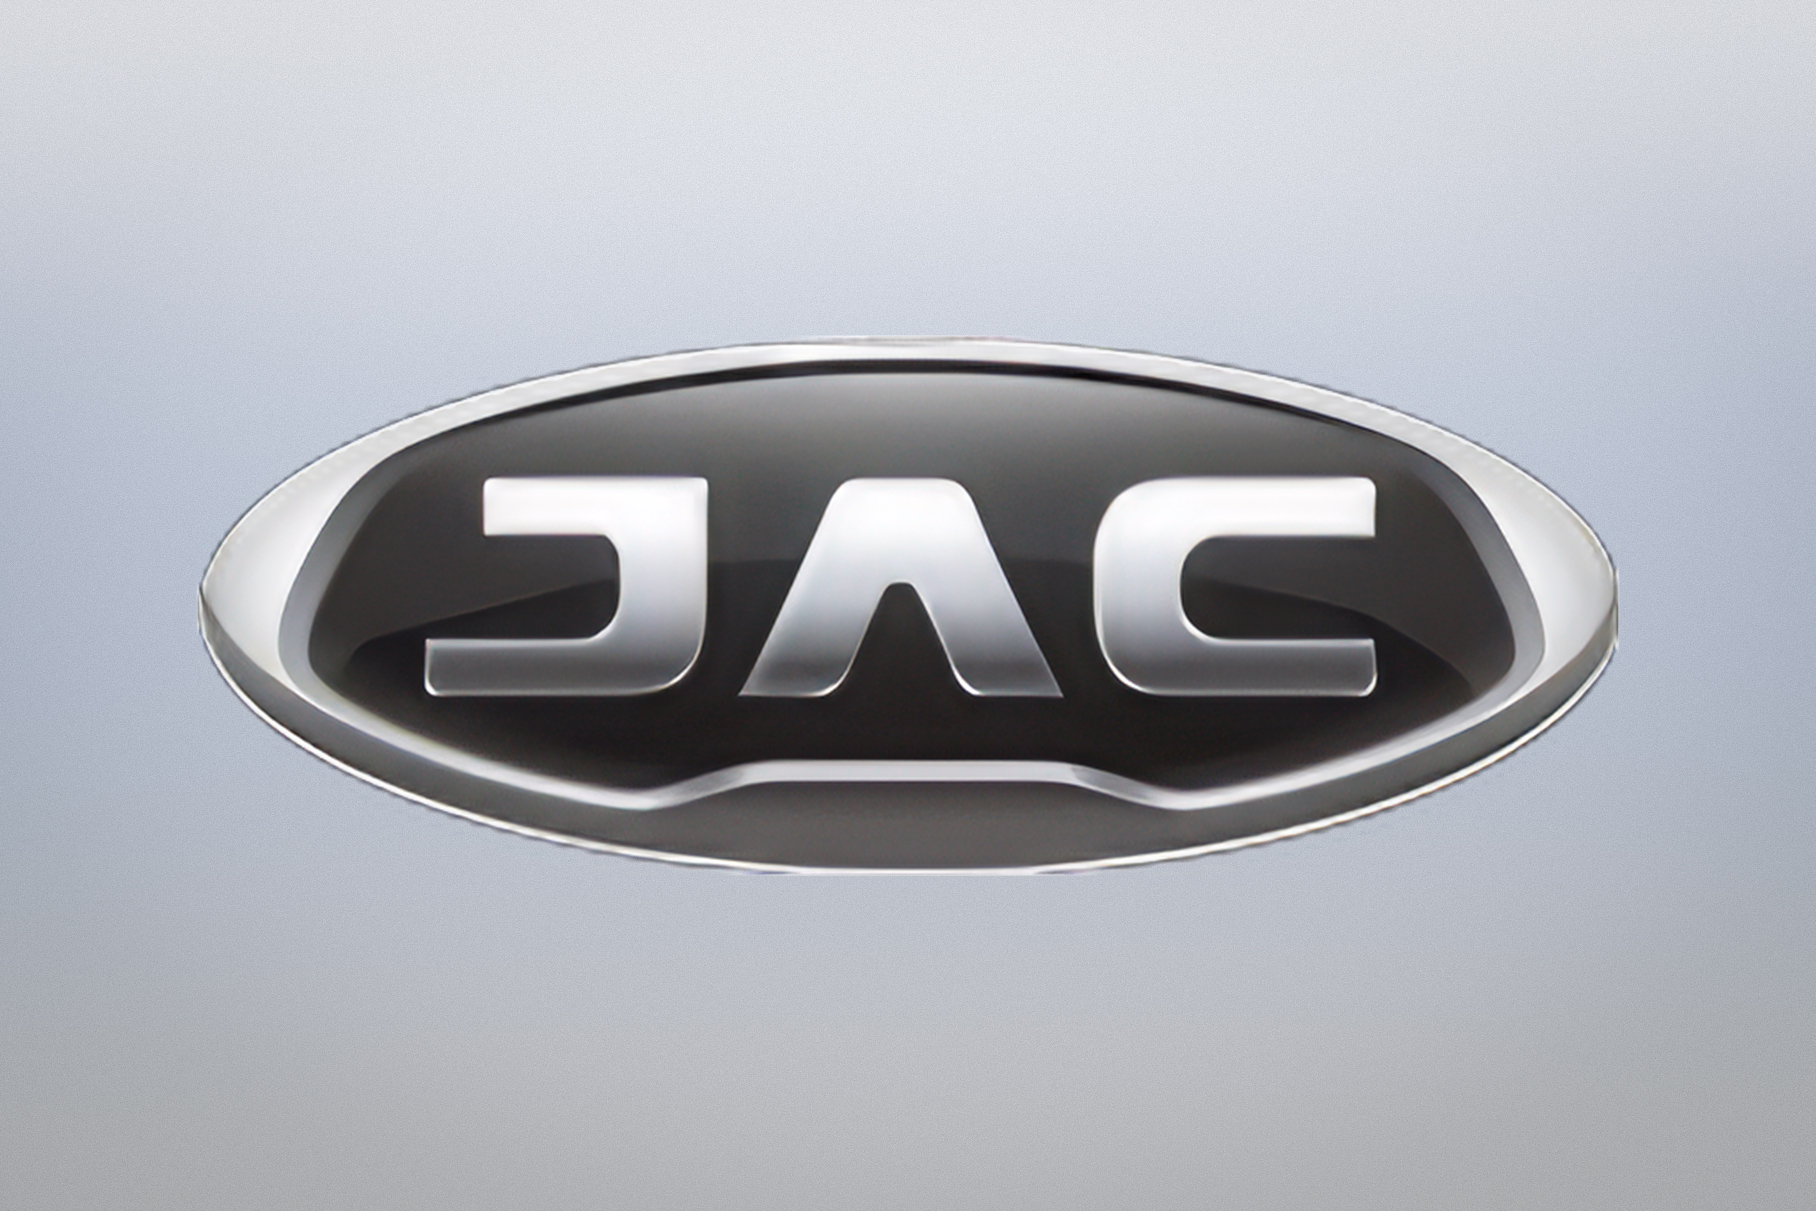 The Chinese brand JAC will change its logo to a more concise one